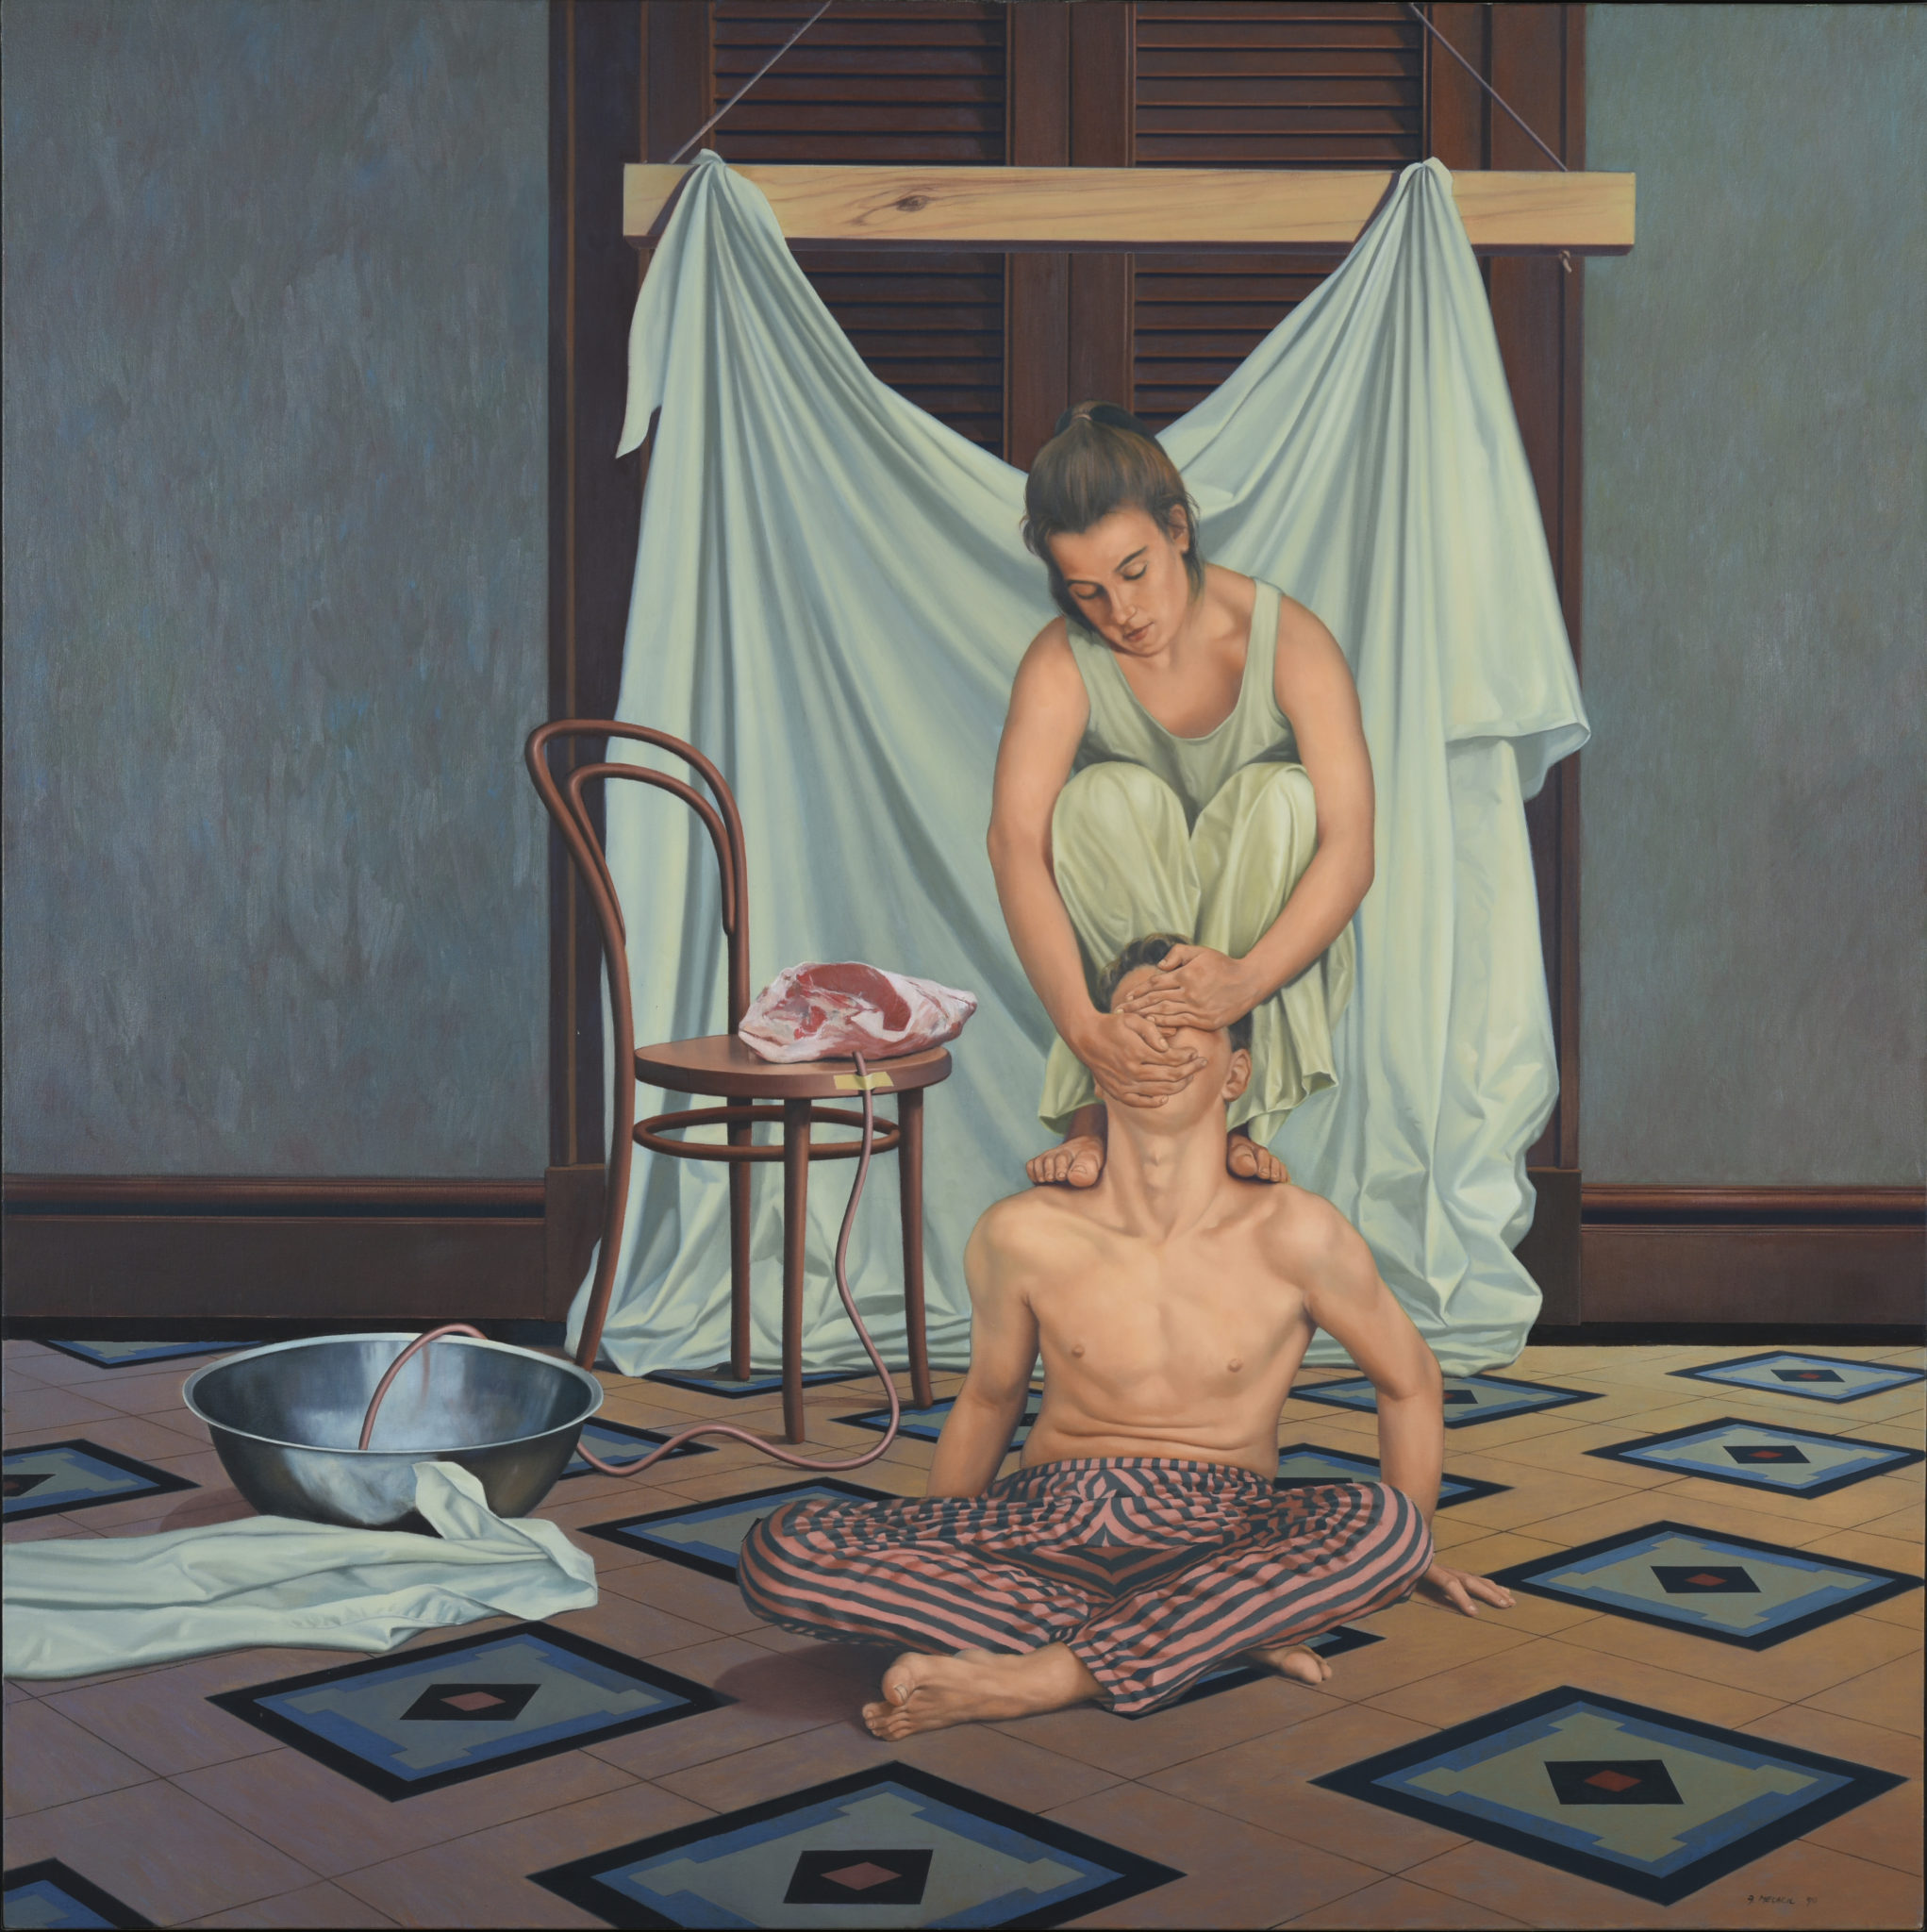 Frank Mesaric, Angel with Lamb, 1990, Oil on canvas, 150 x 150 cm, Latrobe Regional Gallery Collection, purchased with assistance of the Australia Council, 1993.